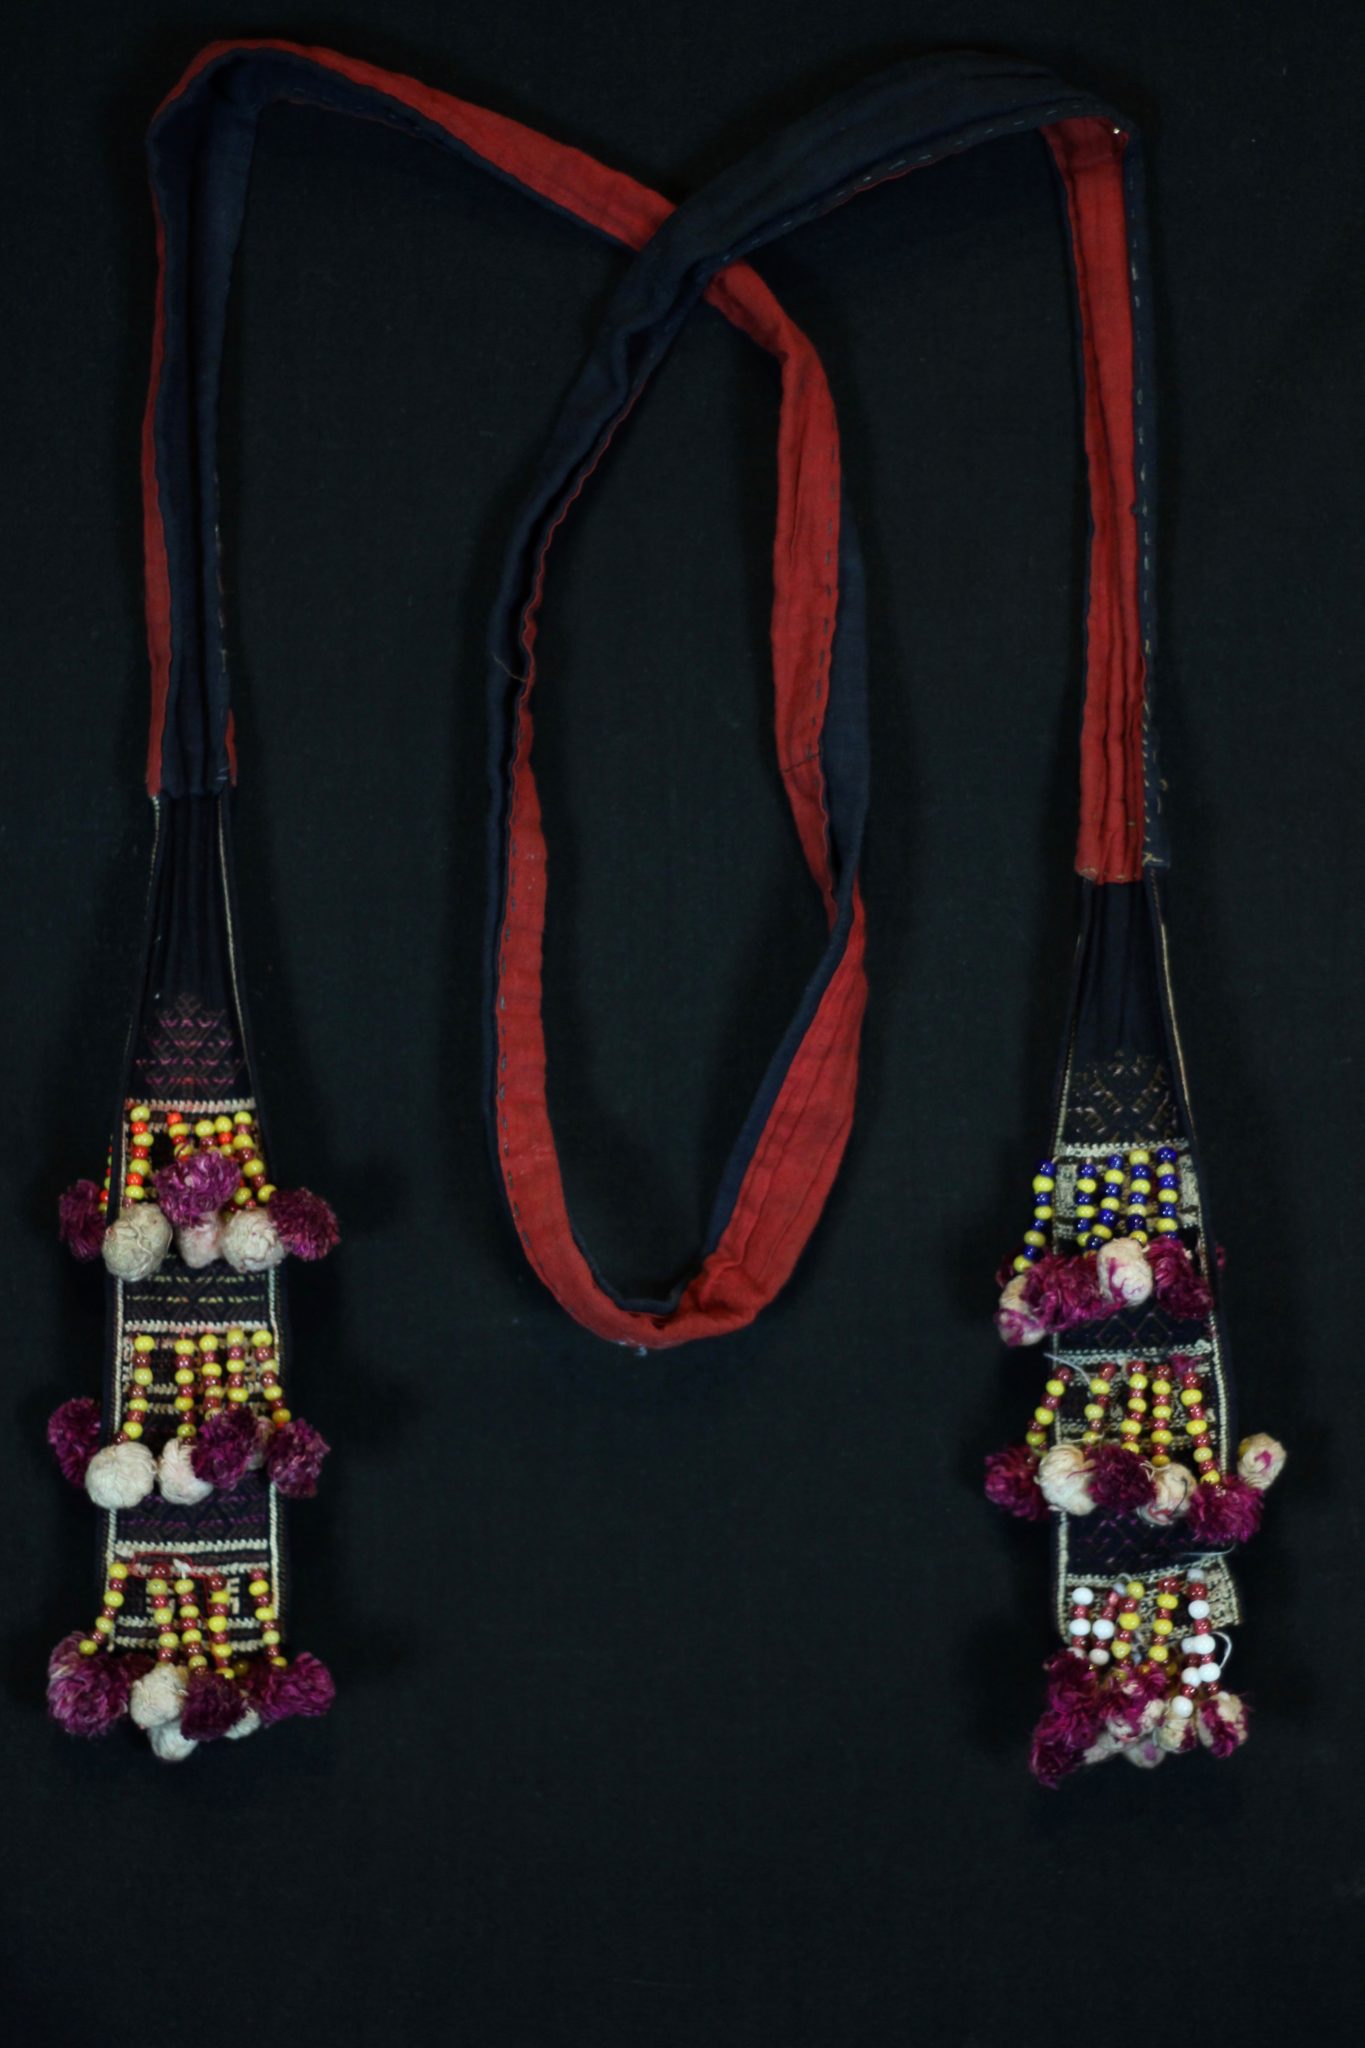 Shaman Costume Belt, Vietnam, Mid 20th c, Cotton, embroidered with silk, glass beads, Part of shaman’s costume. 69 ½” x 3” x 1”, $180